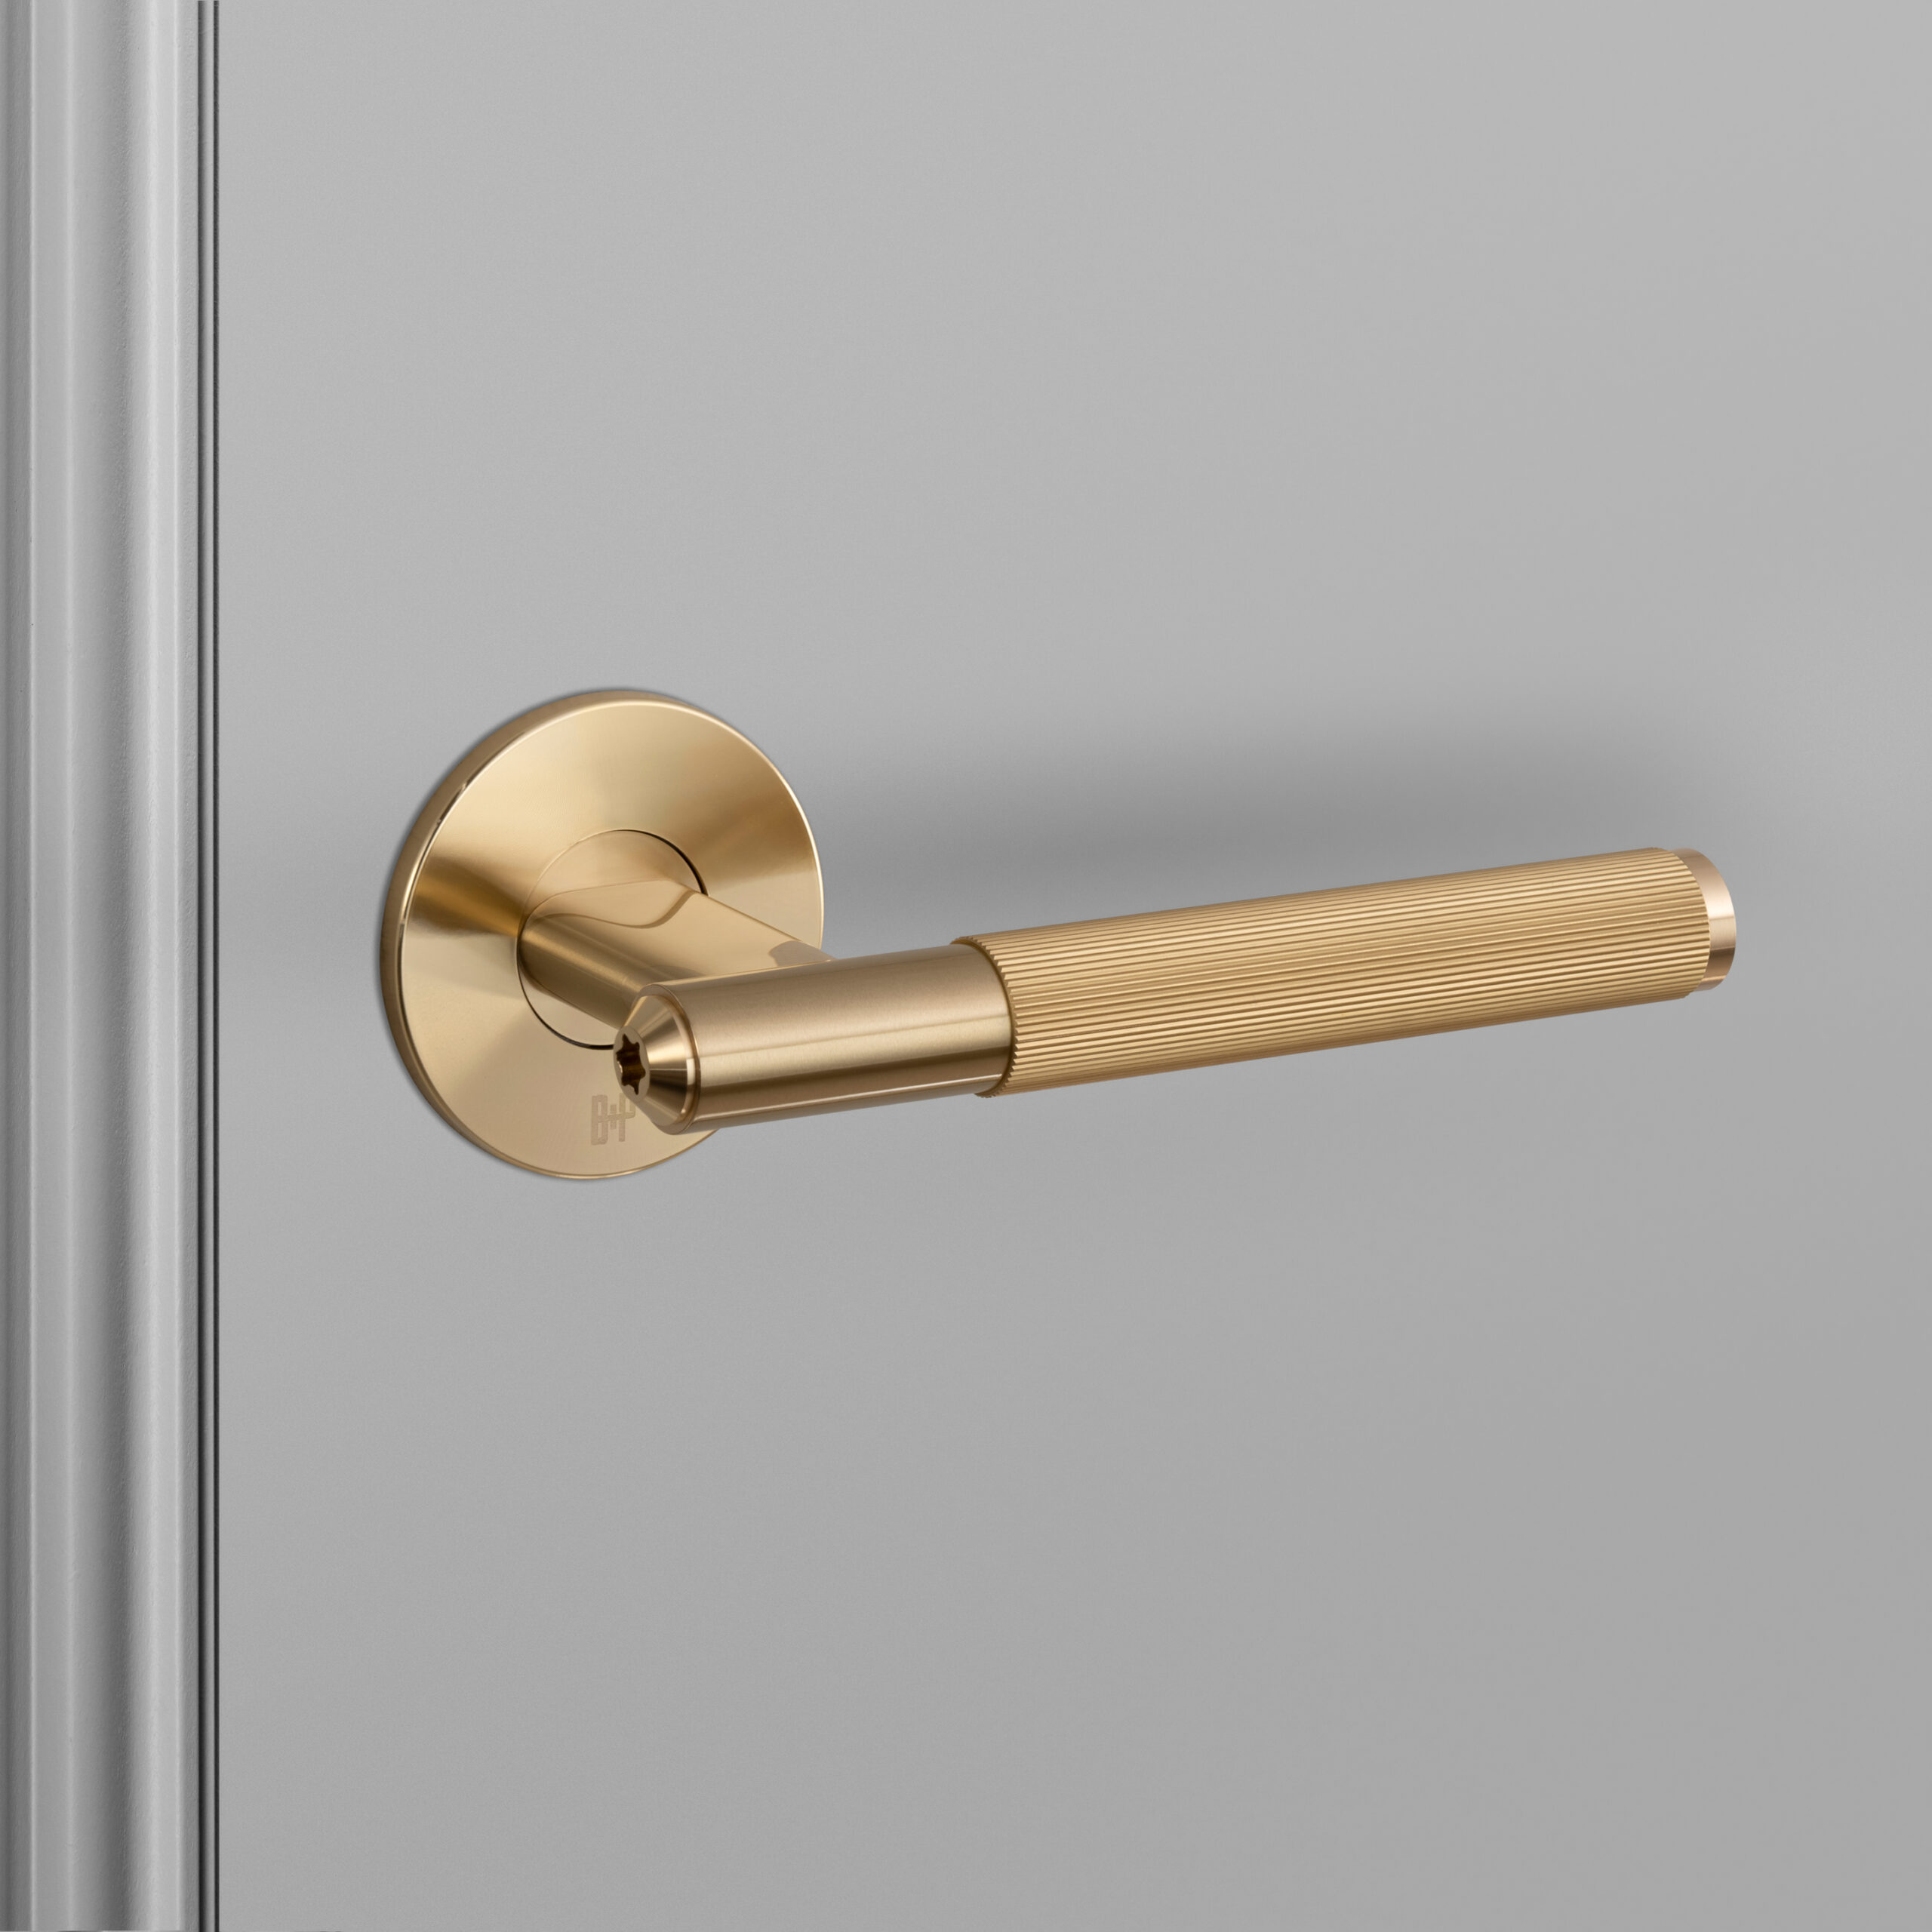 https://www.busterandpunch.com/us/wp-content/uploads/sites/2/2021/04/Door-handle_Fixed_Linear_Brass_A3_Web_Square-scaled.jpg